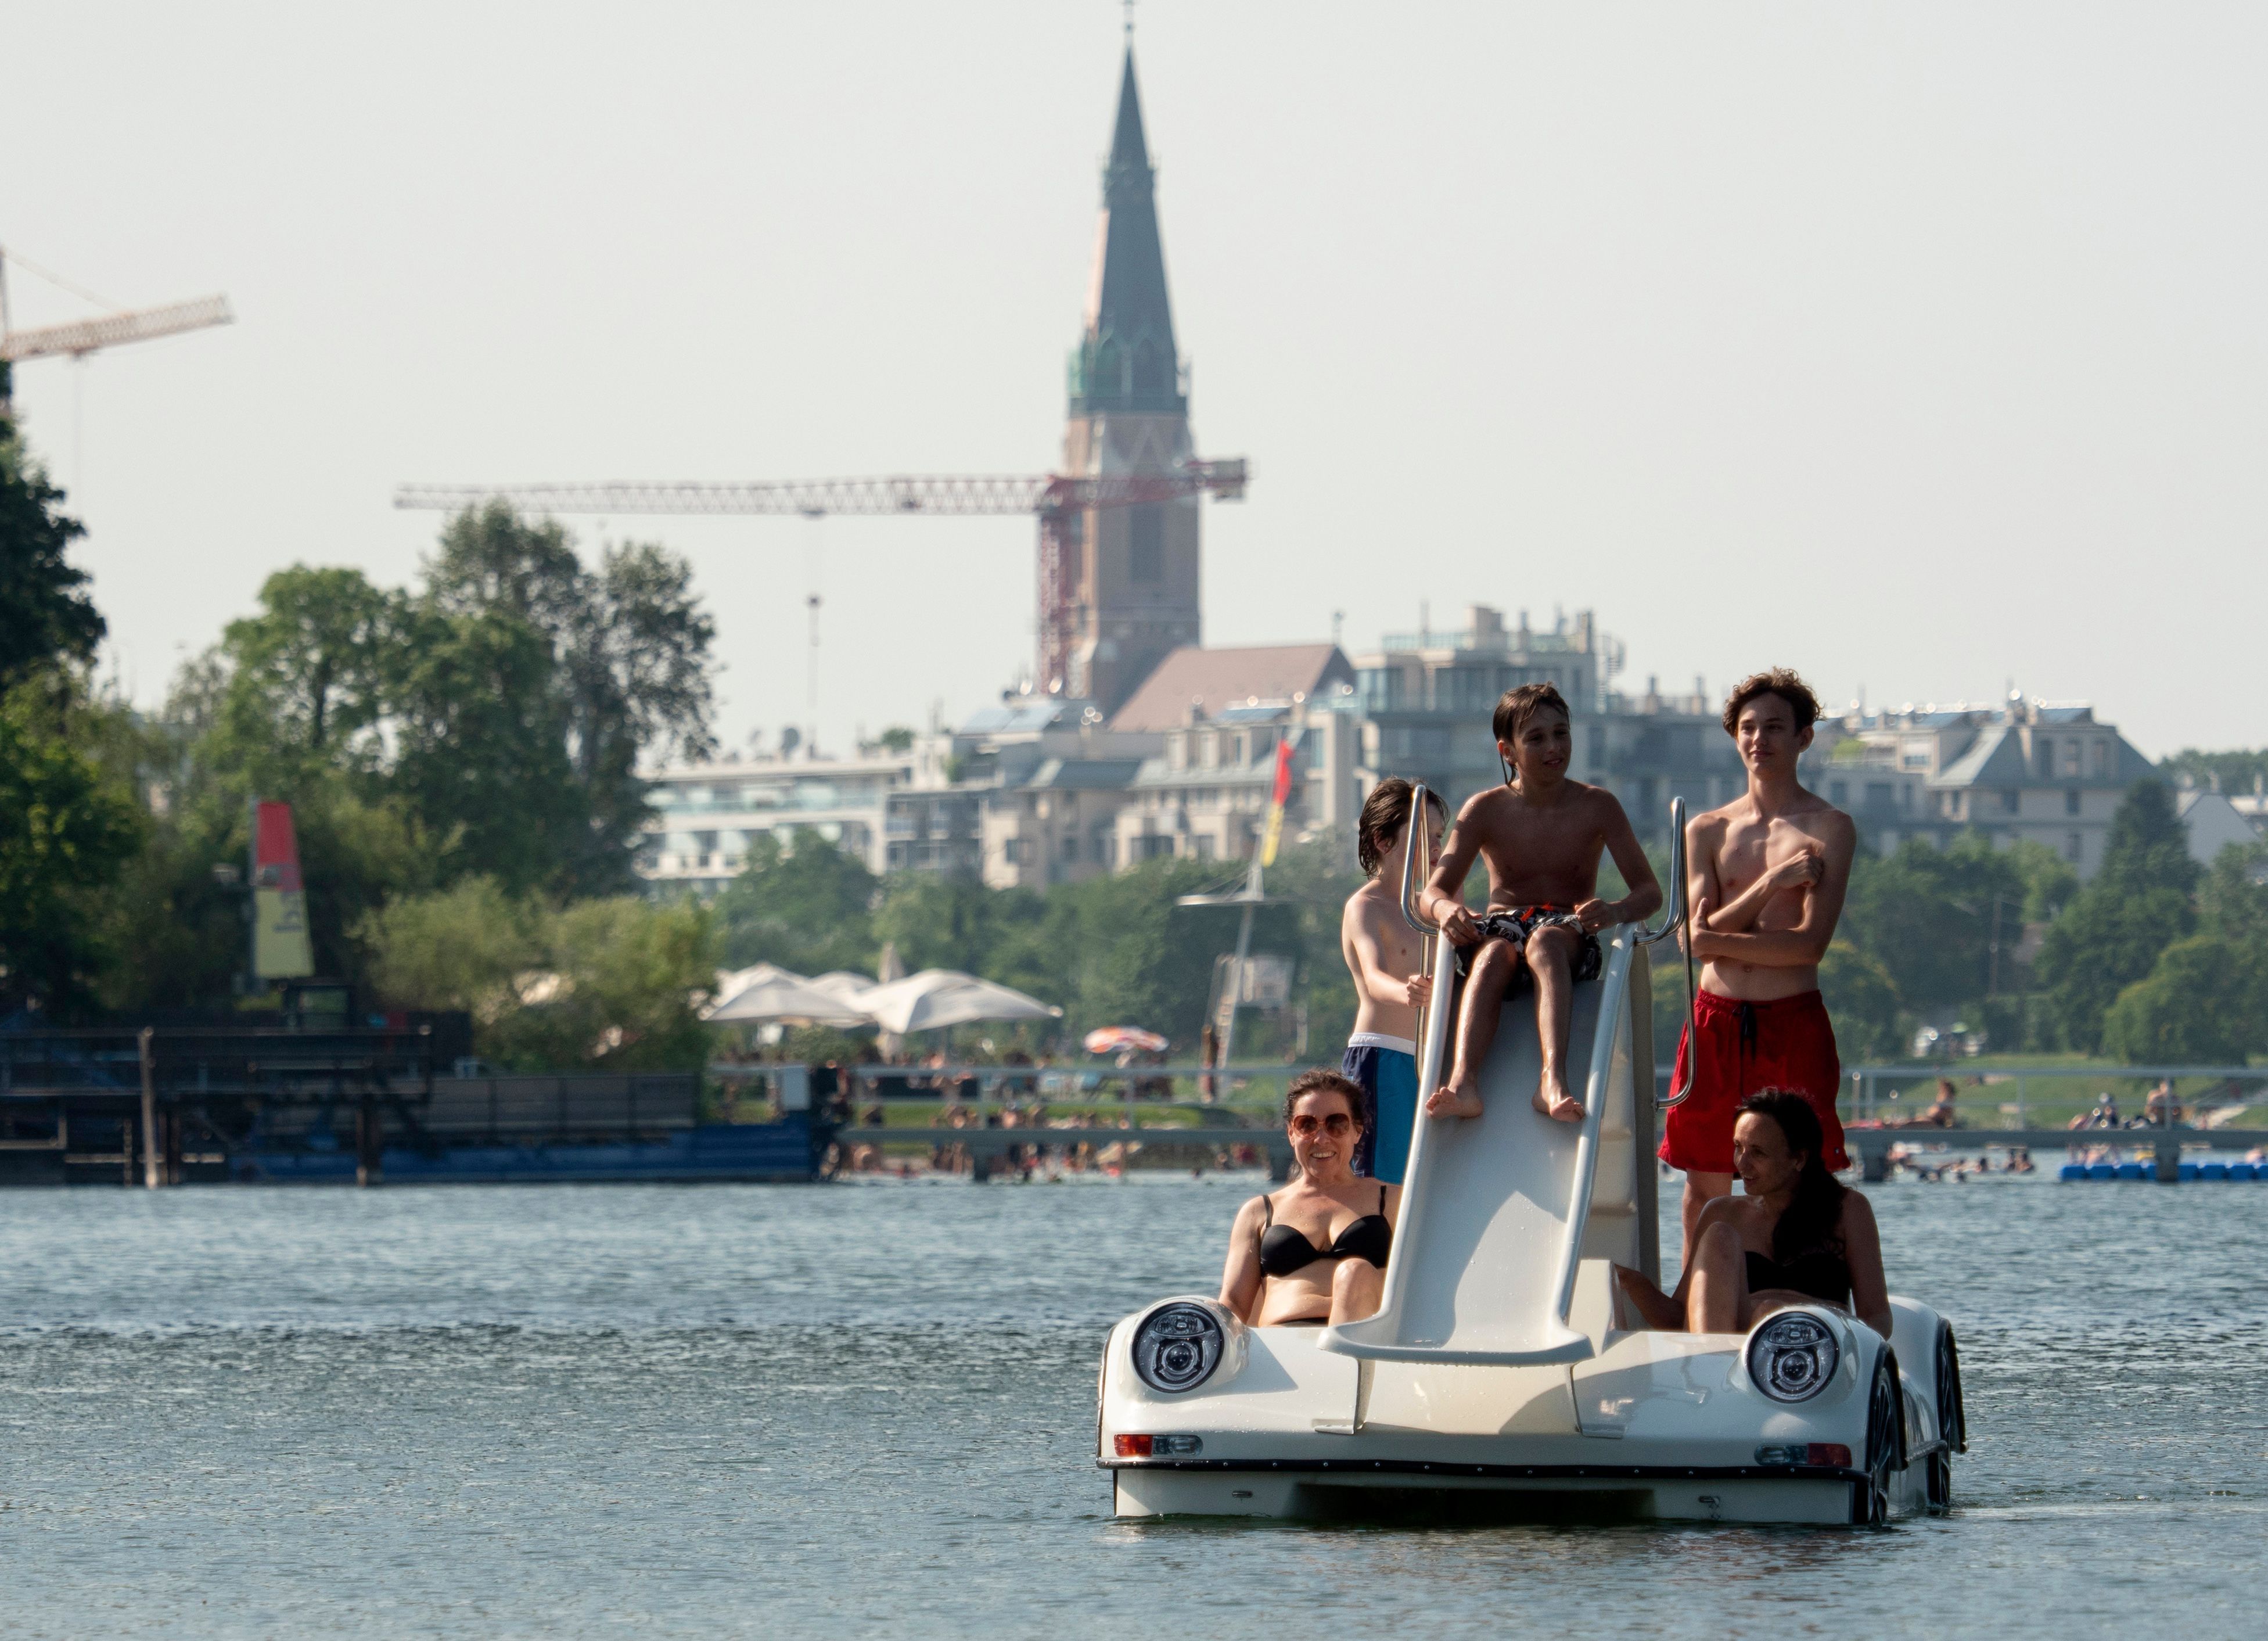 People make their way in peddal boats on the Old Danube (Alte Donnau), a subsidiary of the Danube river, in Vienna, Austria on June 25.